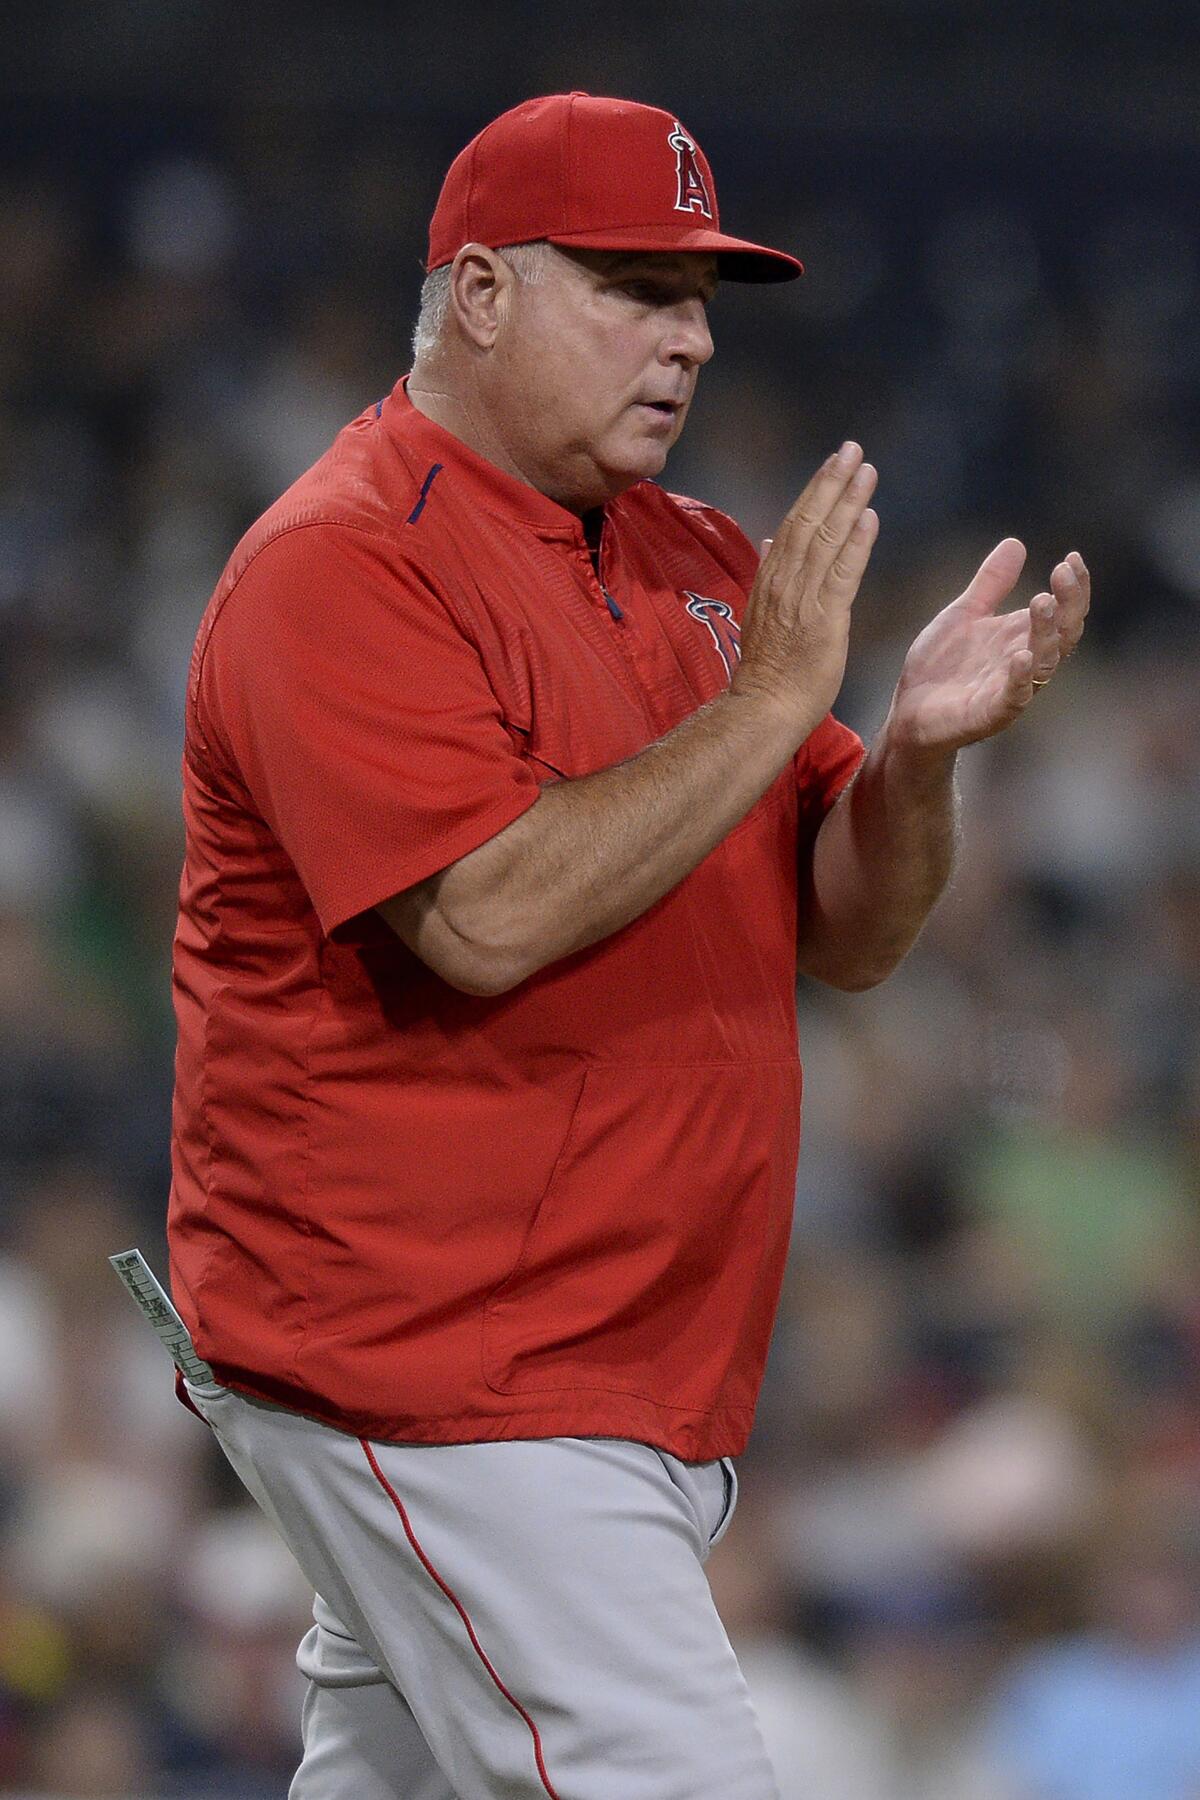 FILE - Los Angeles Angels' Mike Scioscia walks to the mound during the sixth inning of a baseball game against the San Diego Padres, Tuesday, Aug. 14, 2018, in San Diego. Former Dodgers catcher Mike Scioscia will manage the National League team of prospects and retired shortstop Jimmy Rollins will lead the American League group at the All-Star Futures Game in Los Angeles on July 17. (AP Photo/Orlando Ramirez)